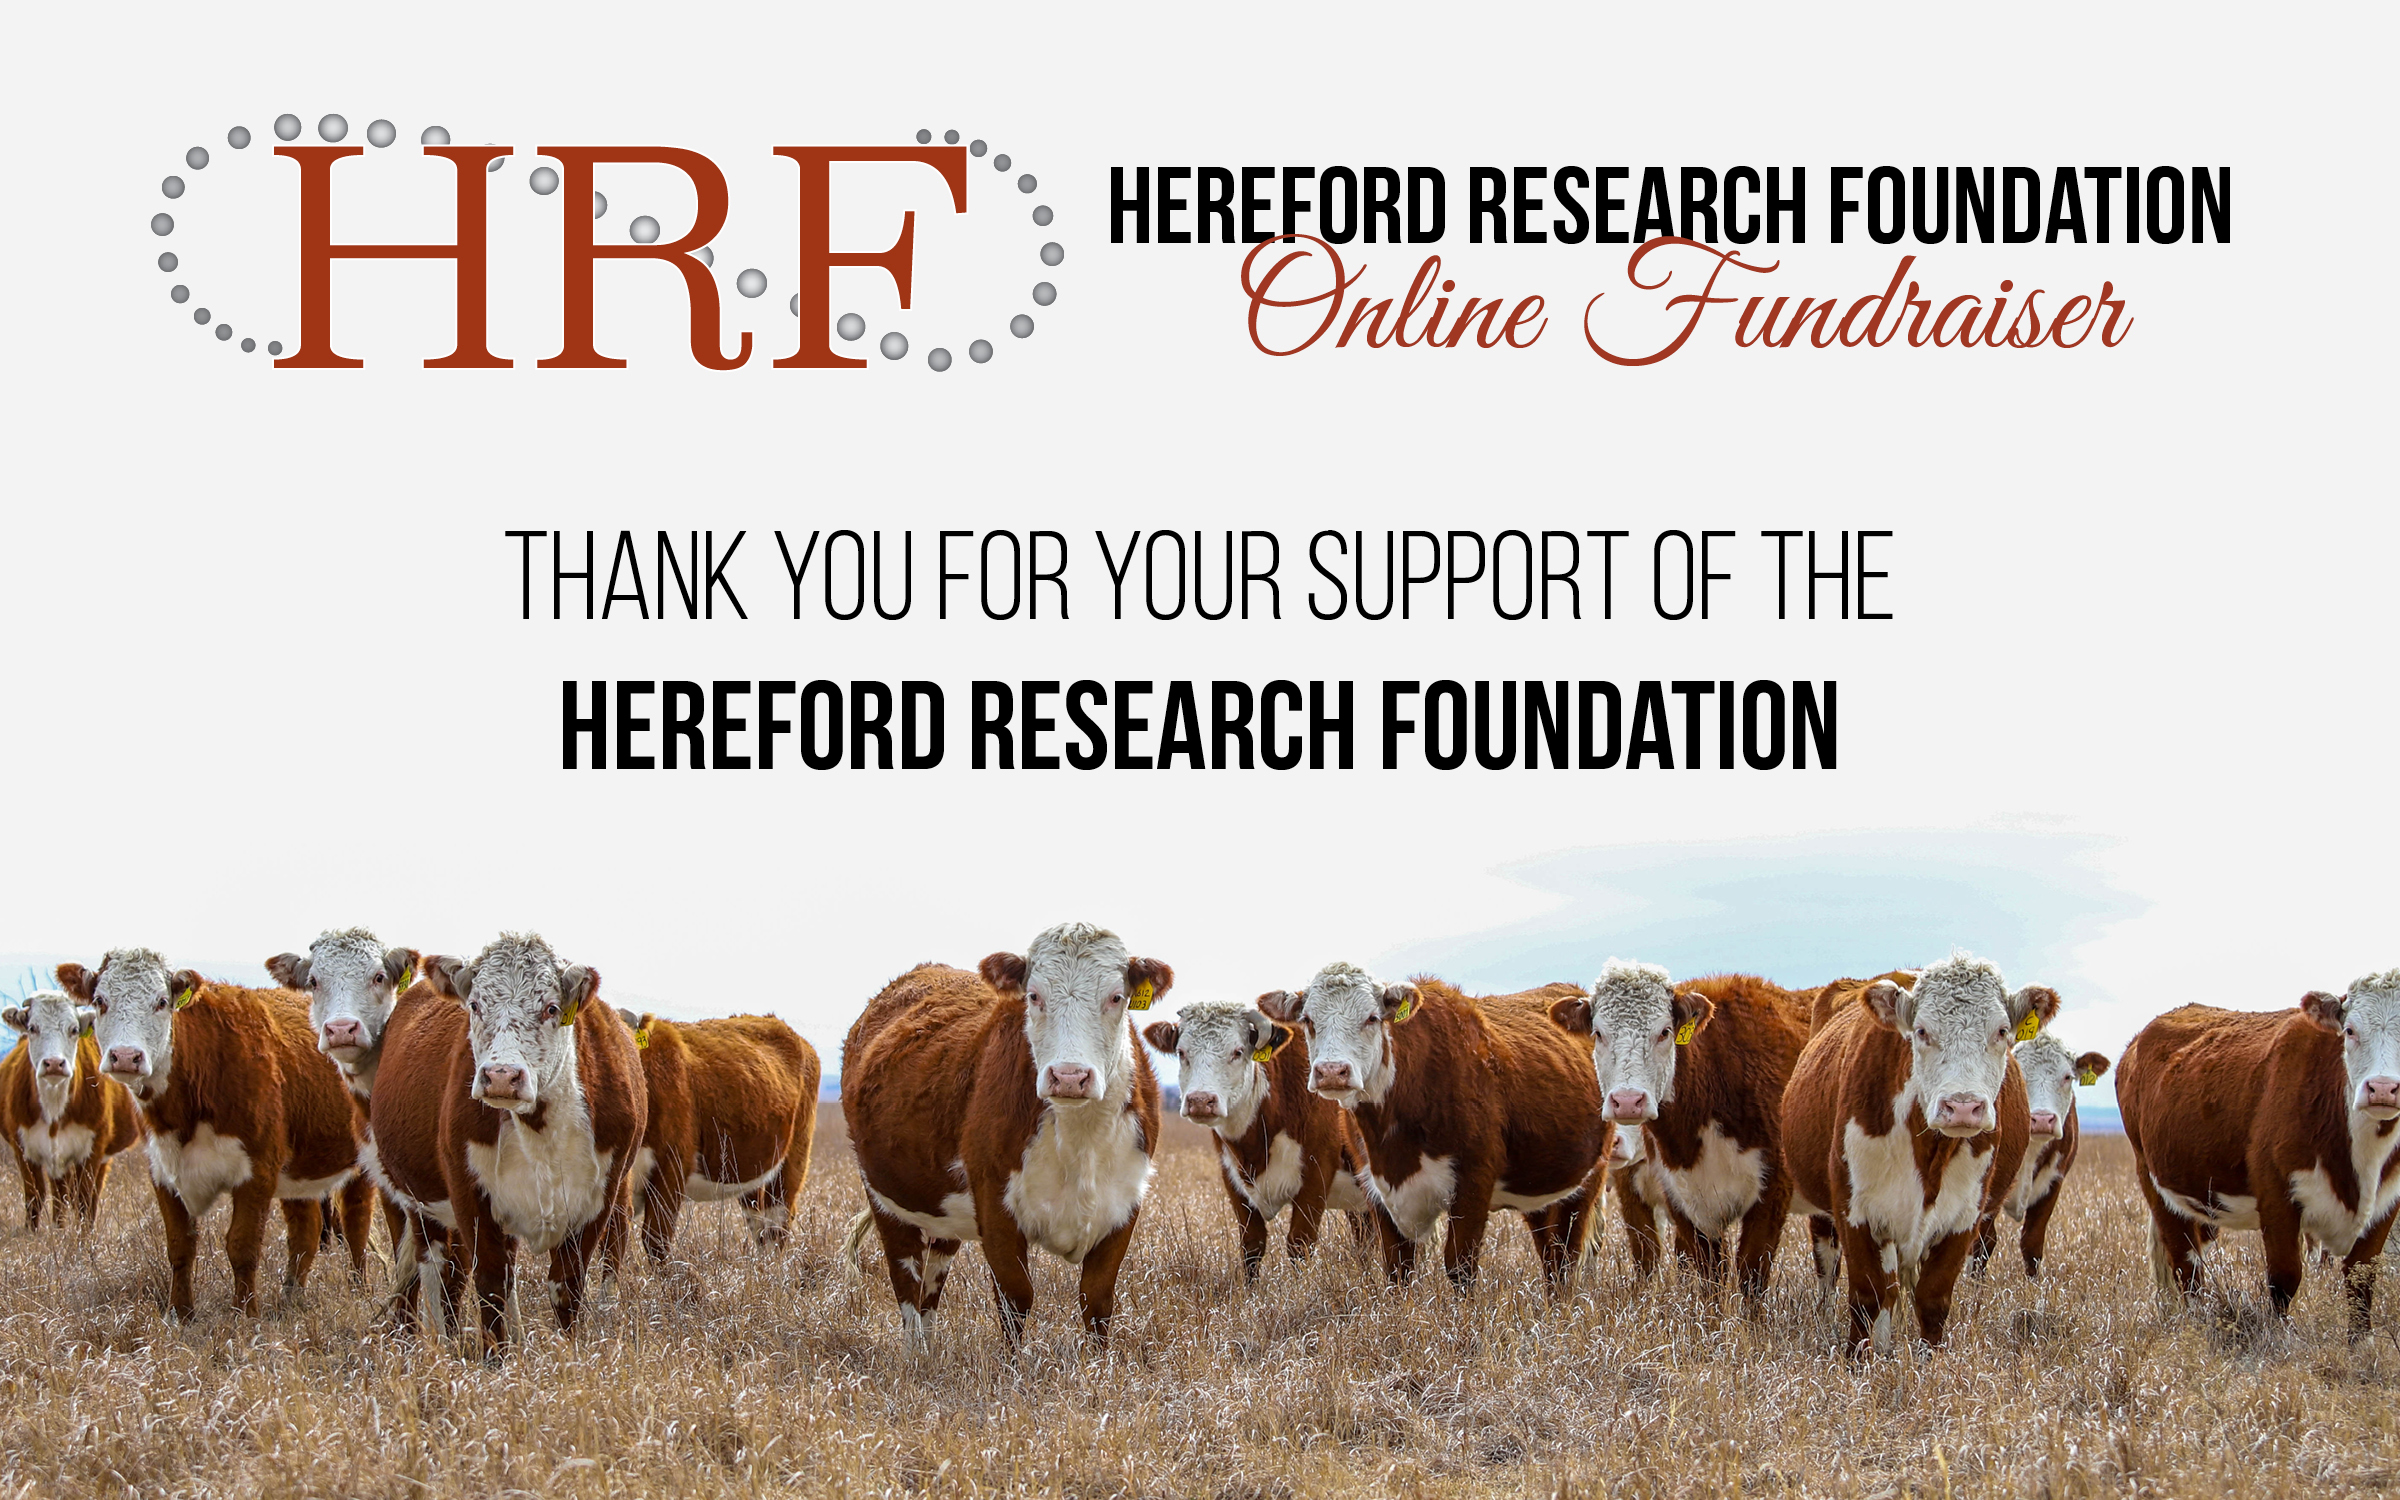 Online Auction raises approximately $40,000 for Hereford Research Foundation